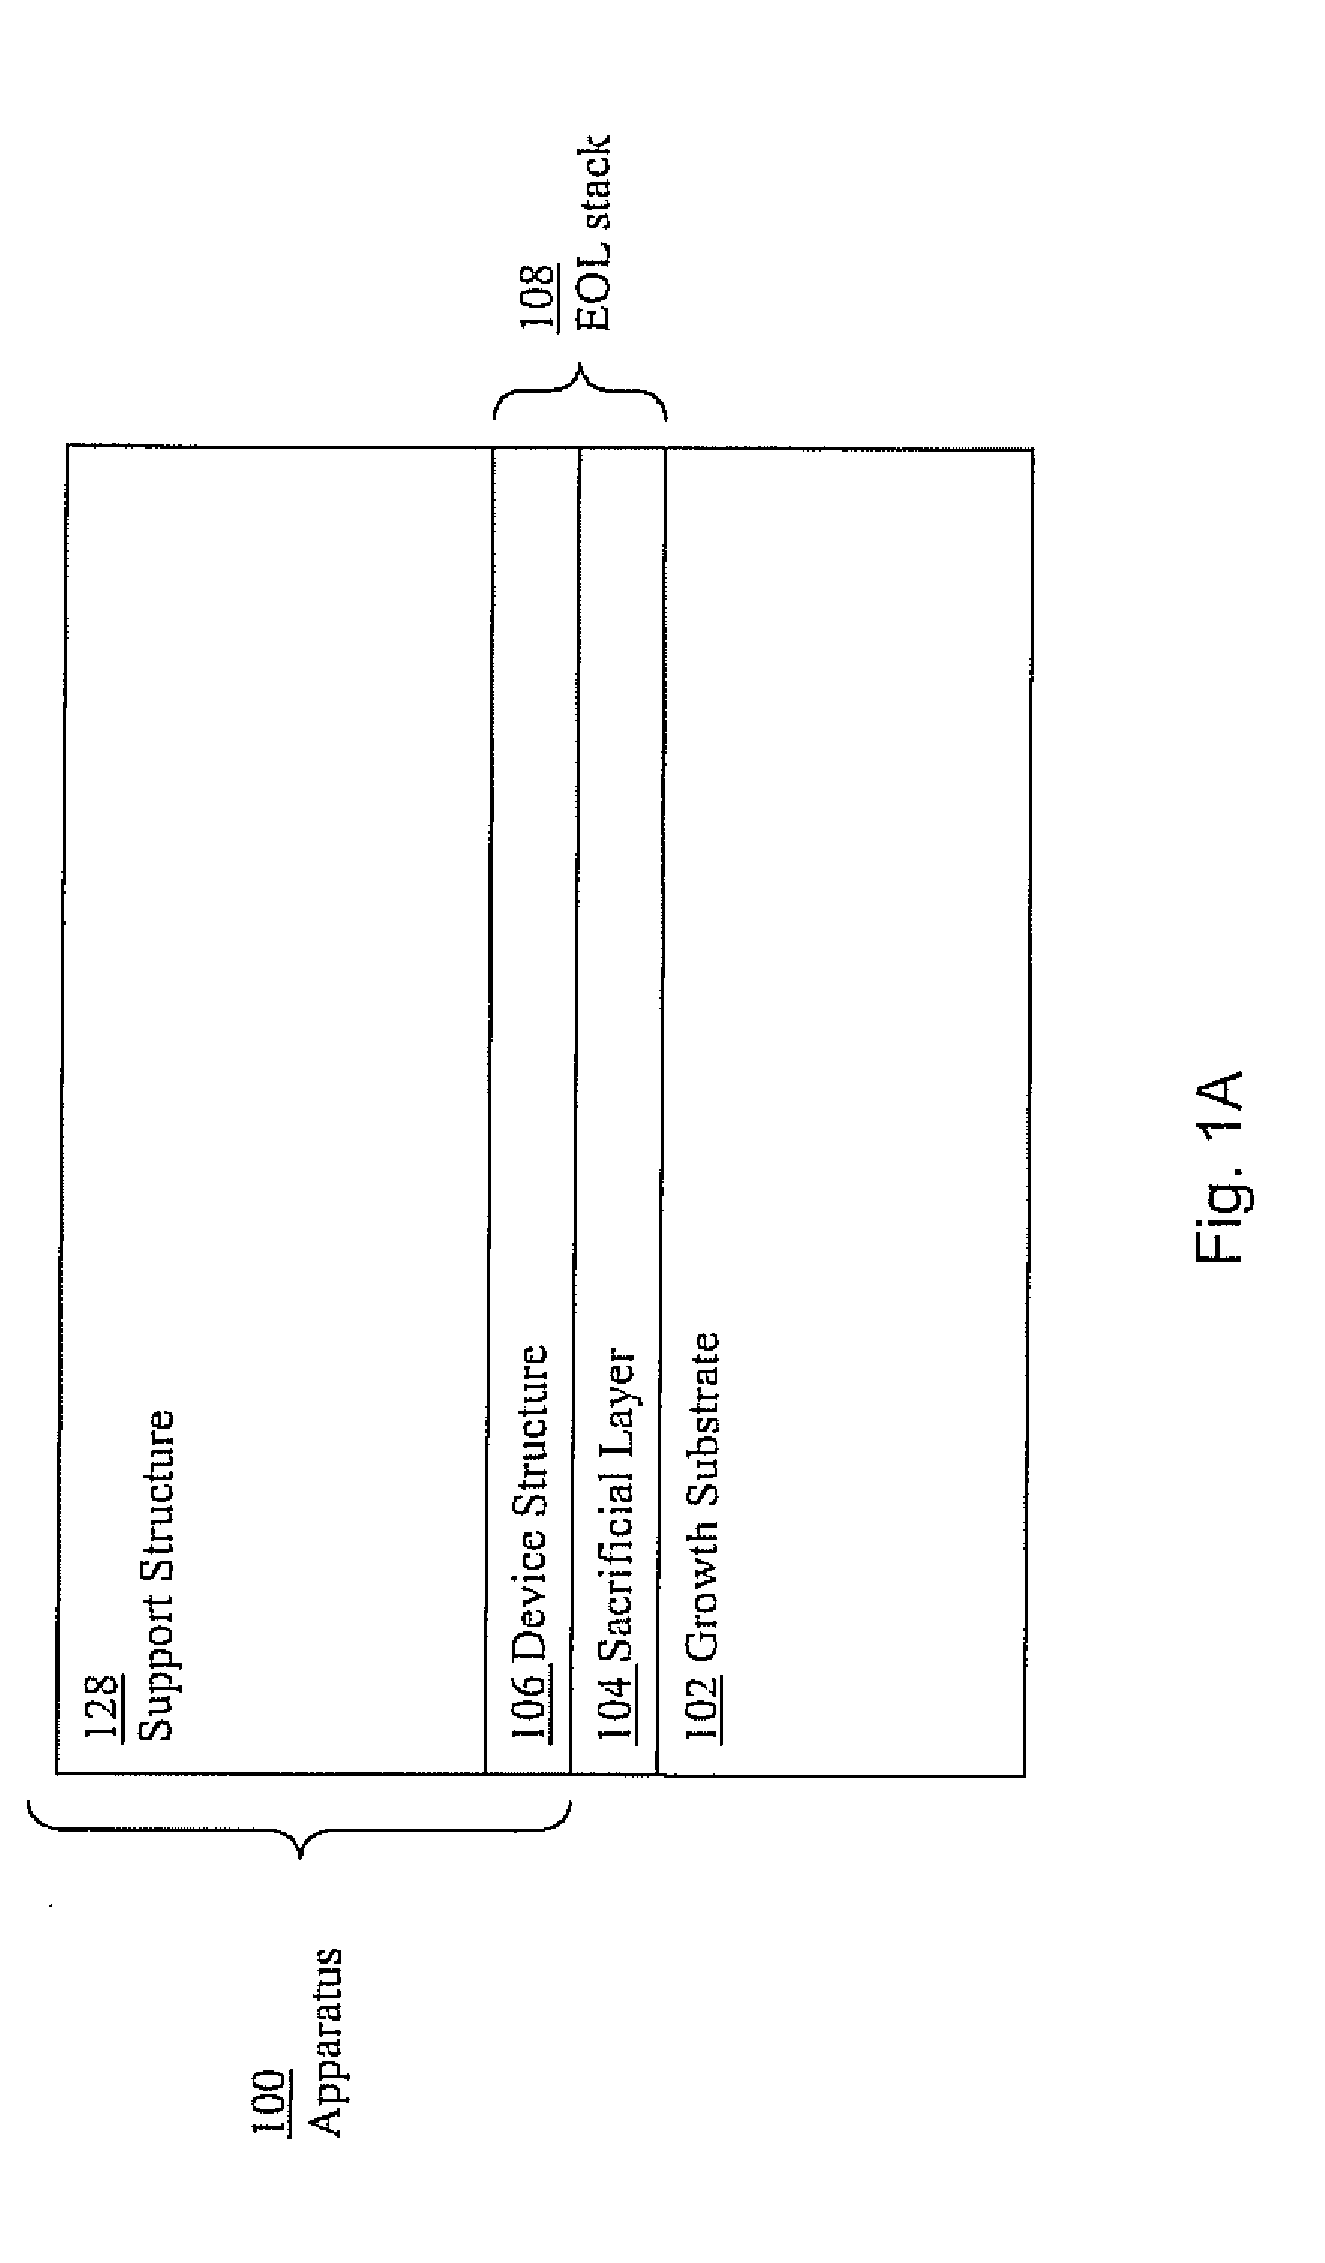 Support structures for various apparatuses including opto-electrical apparatuses